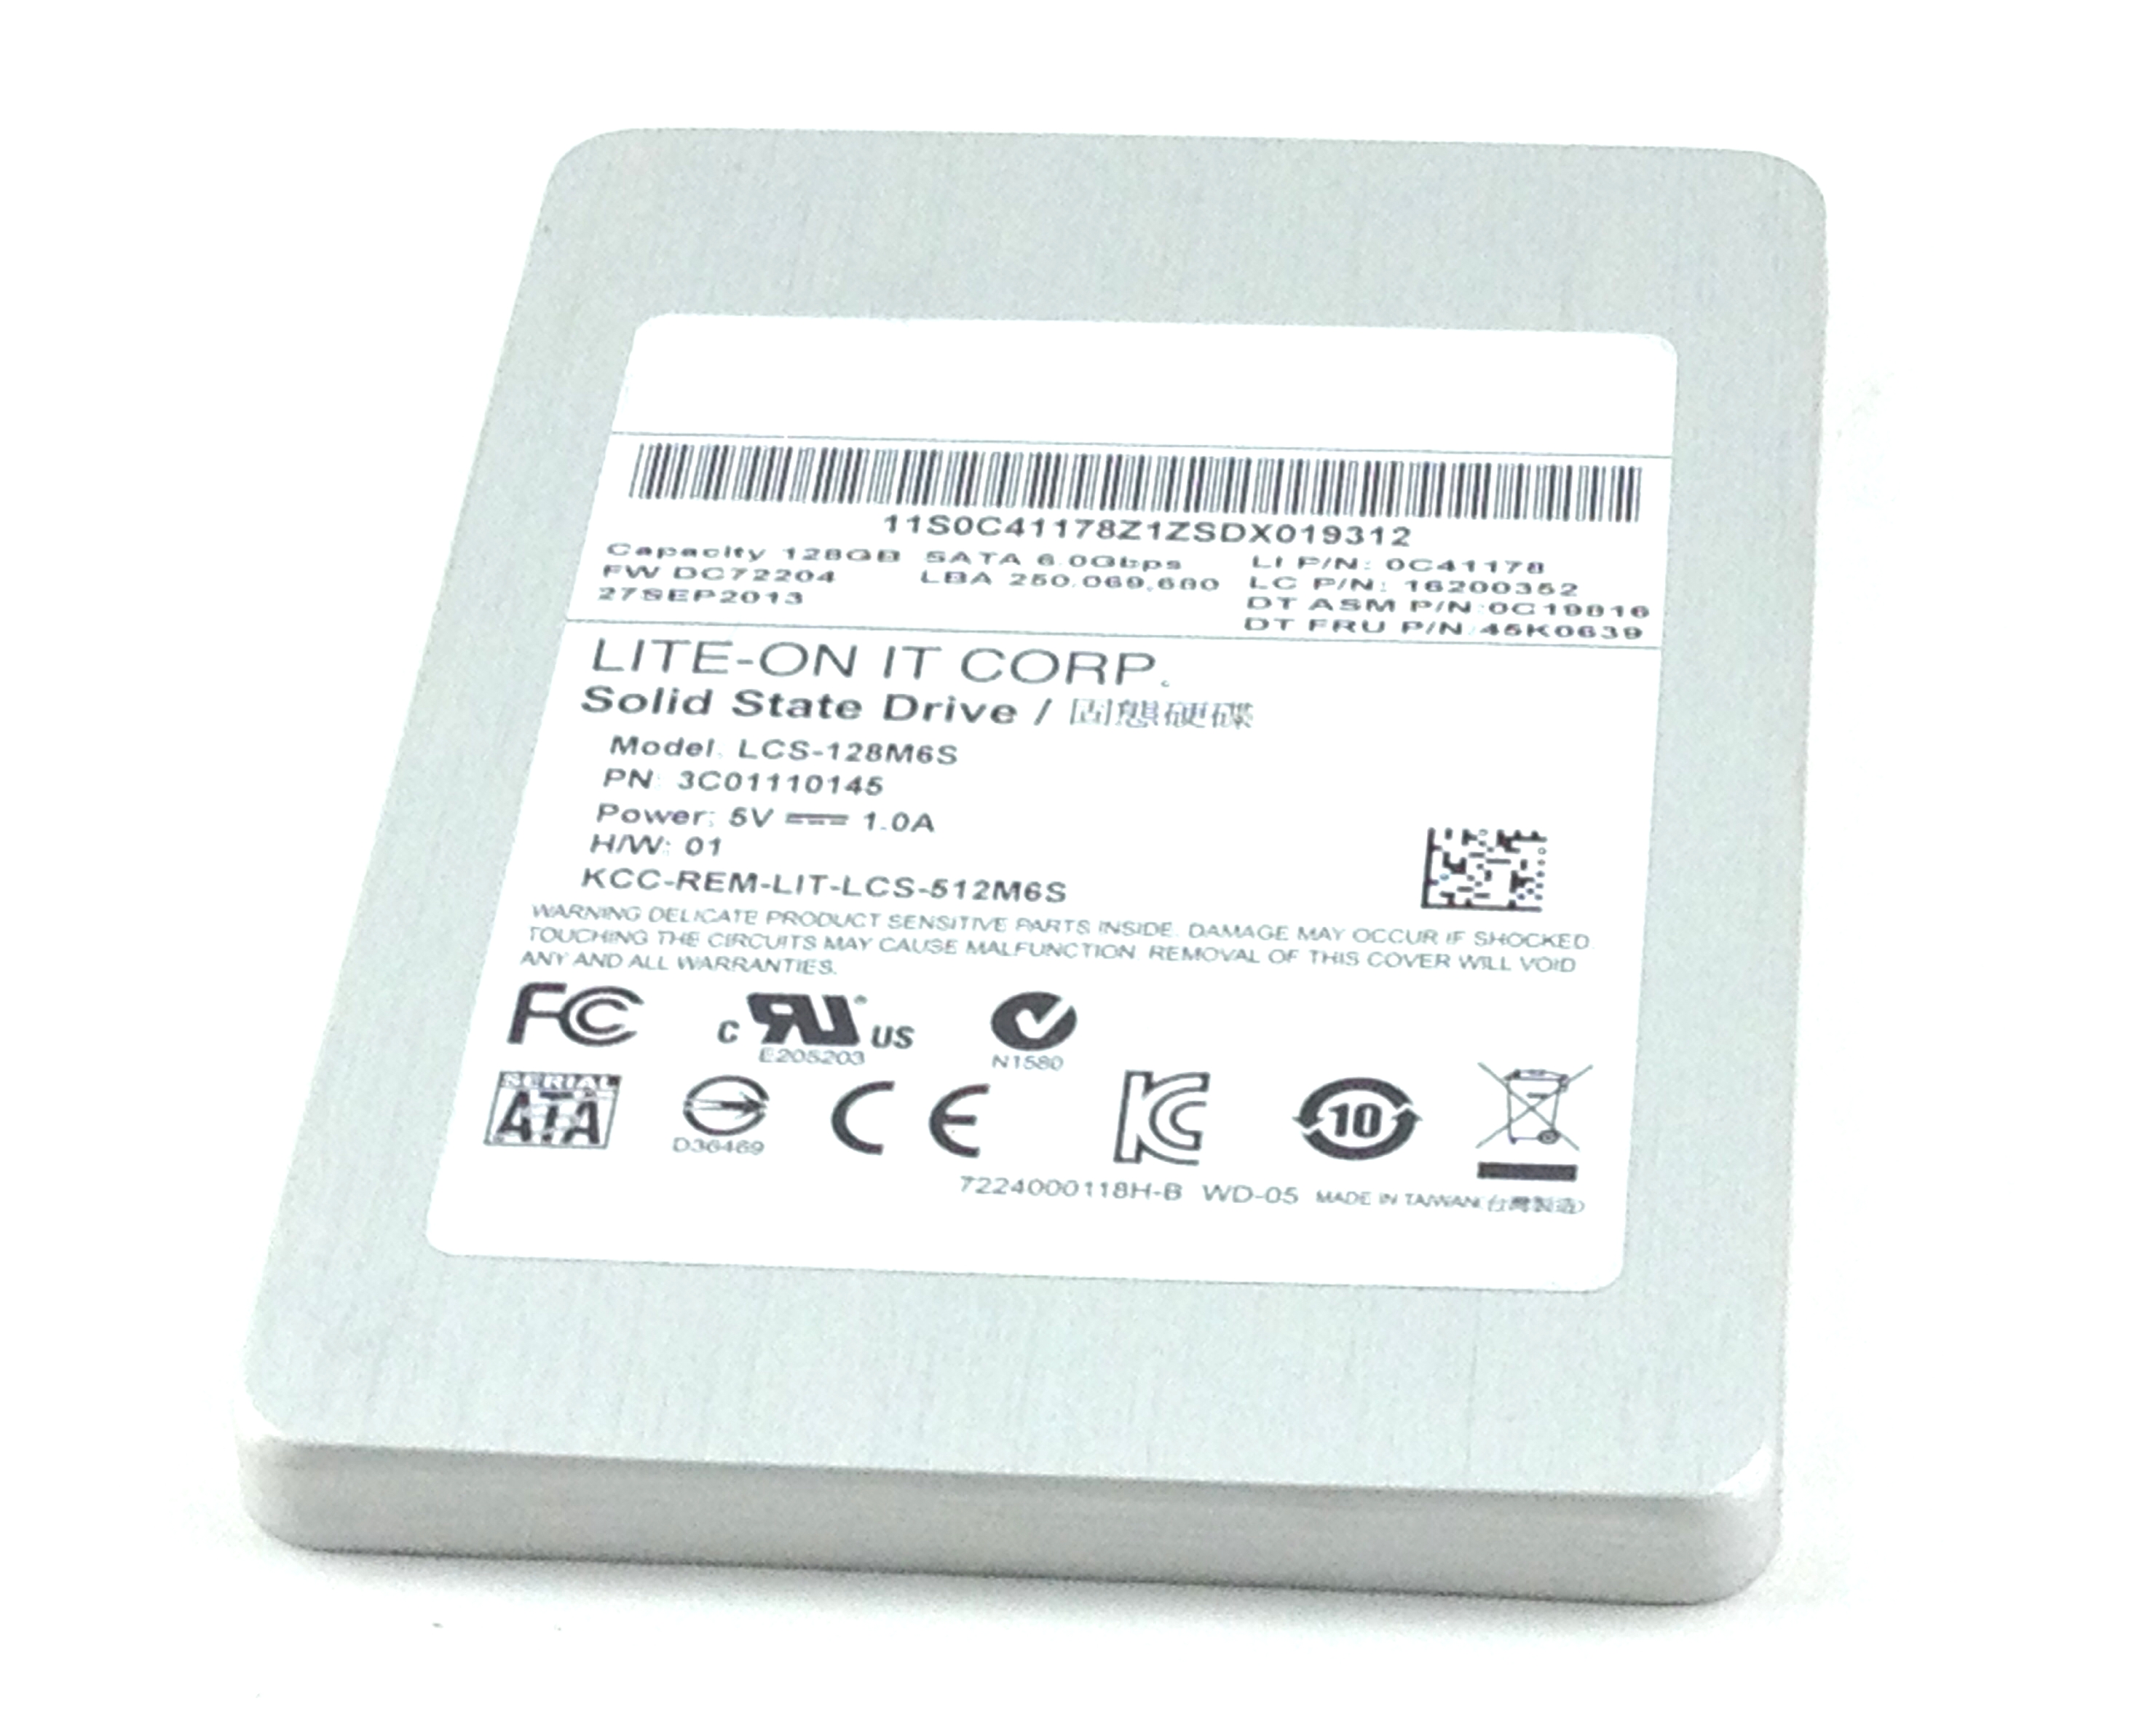 Server Parts - Solid State Drive